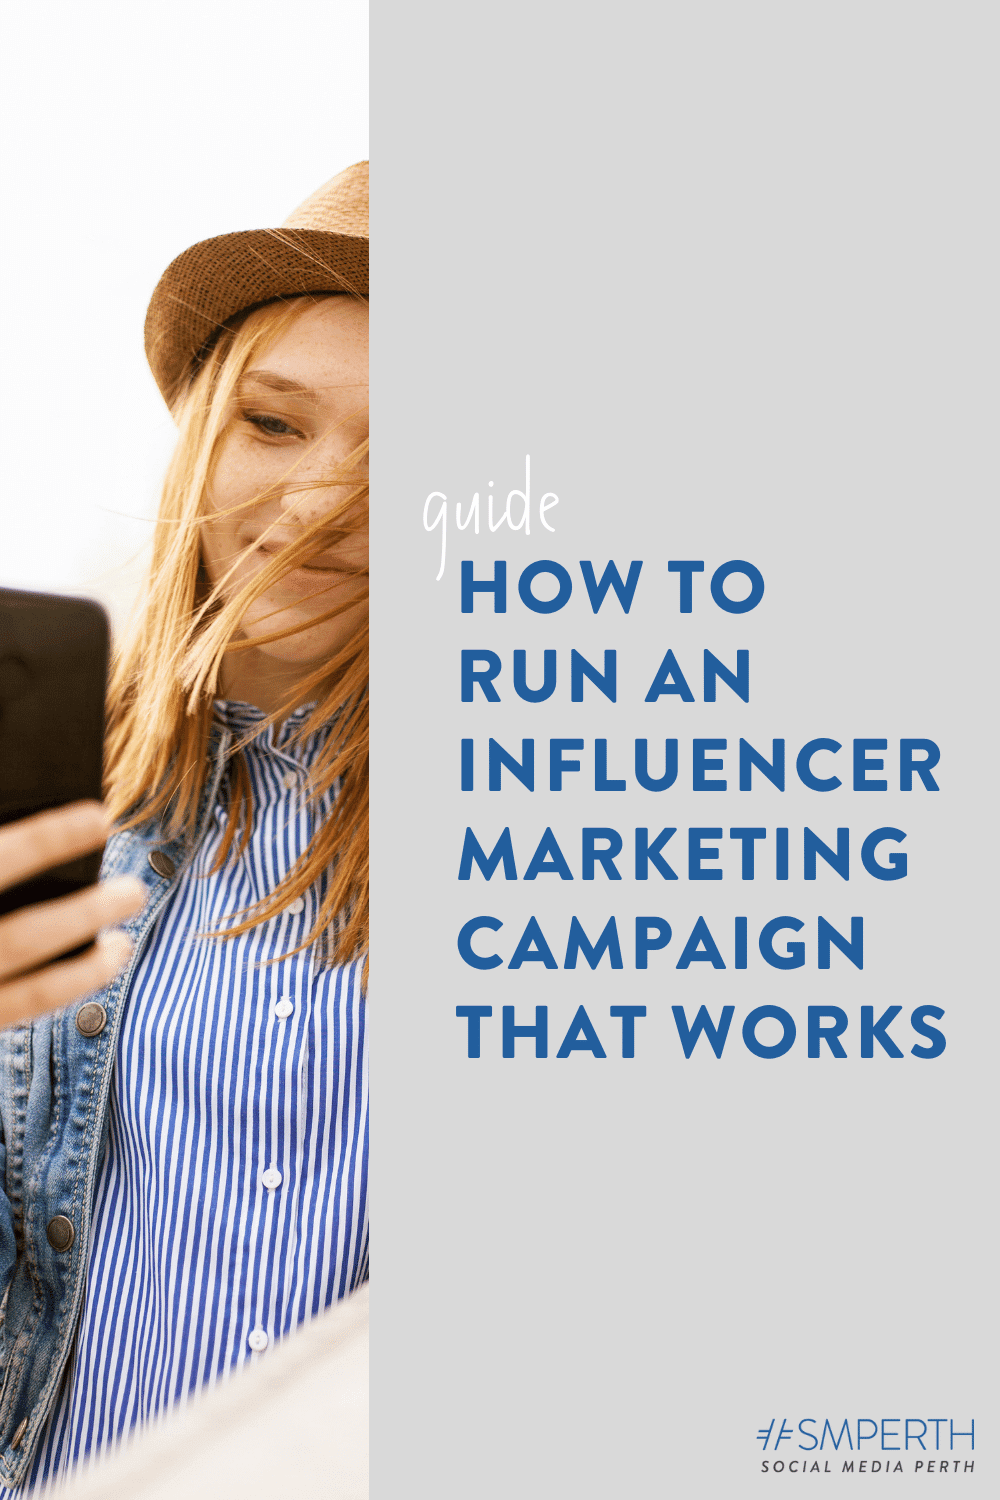 How to run an influencer marketing campaign that works